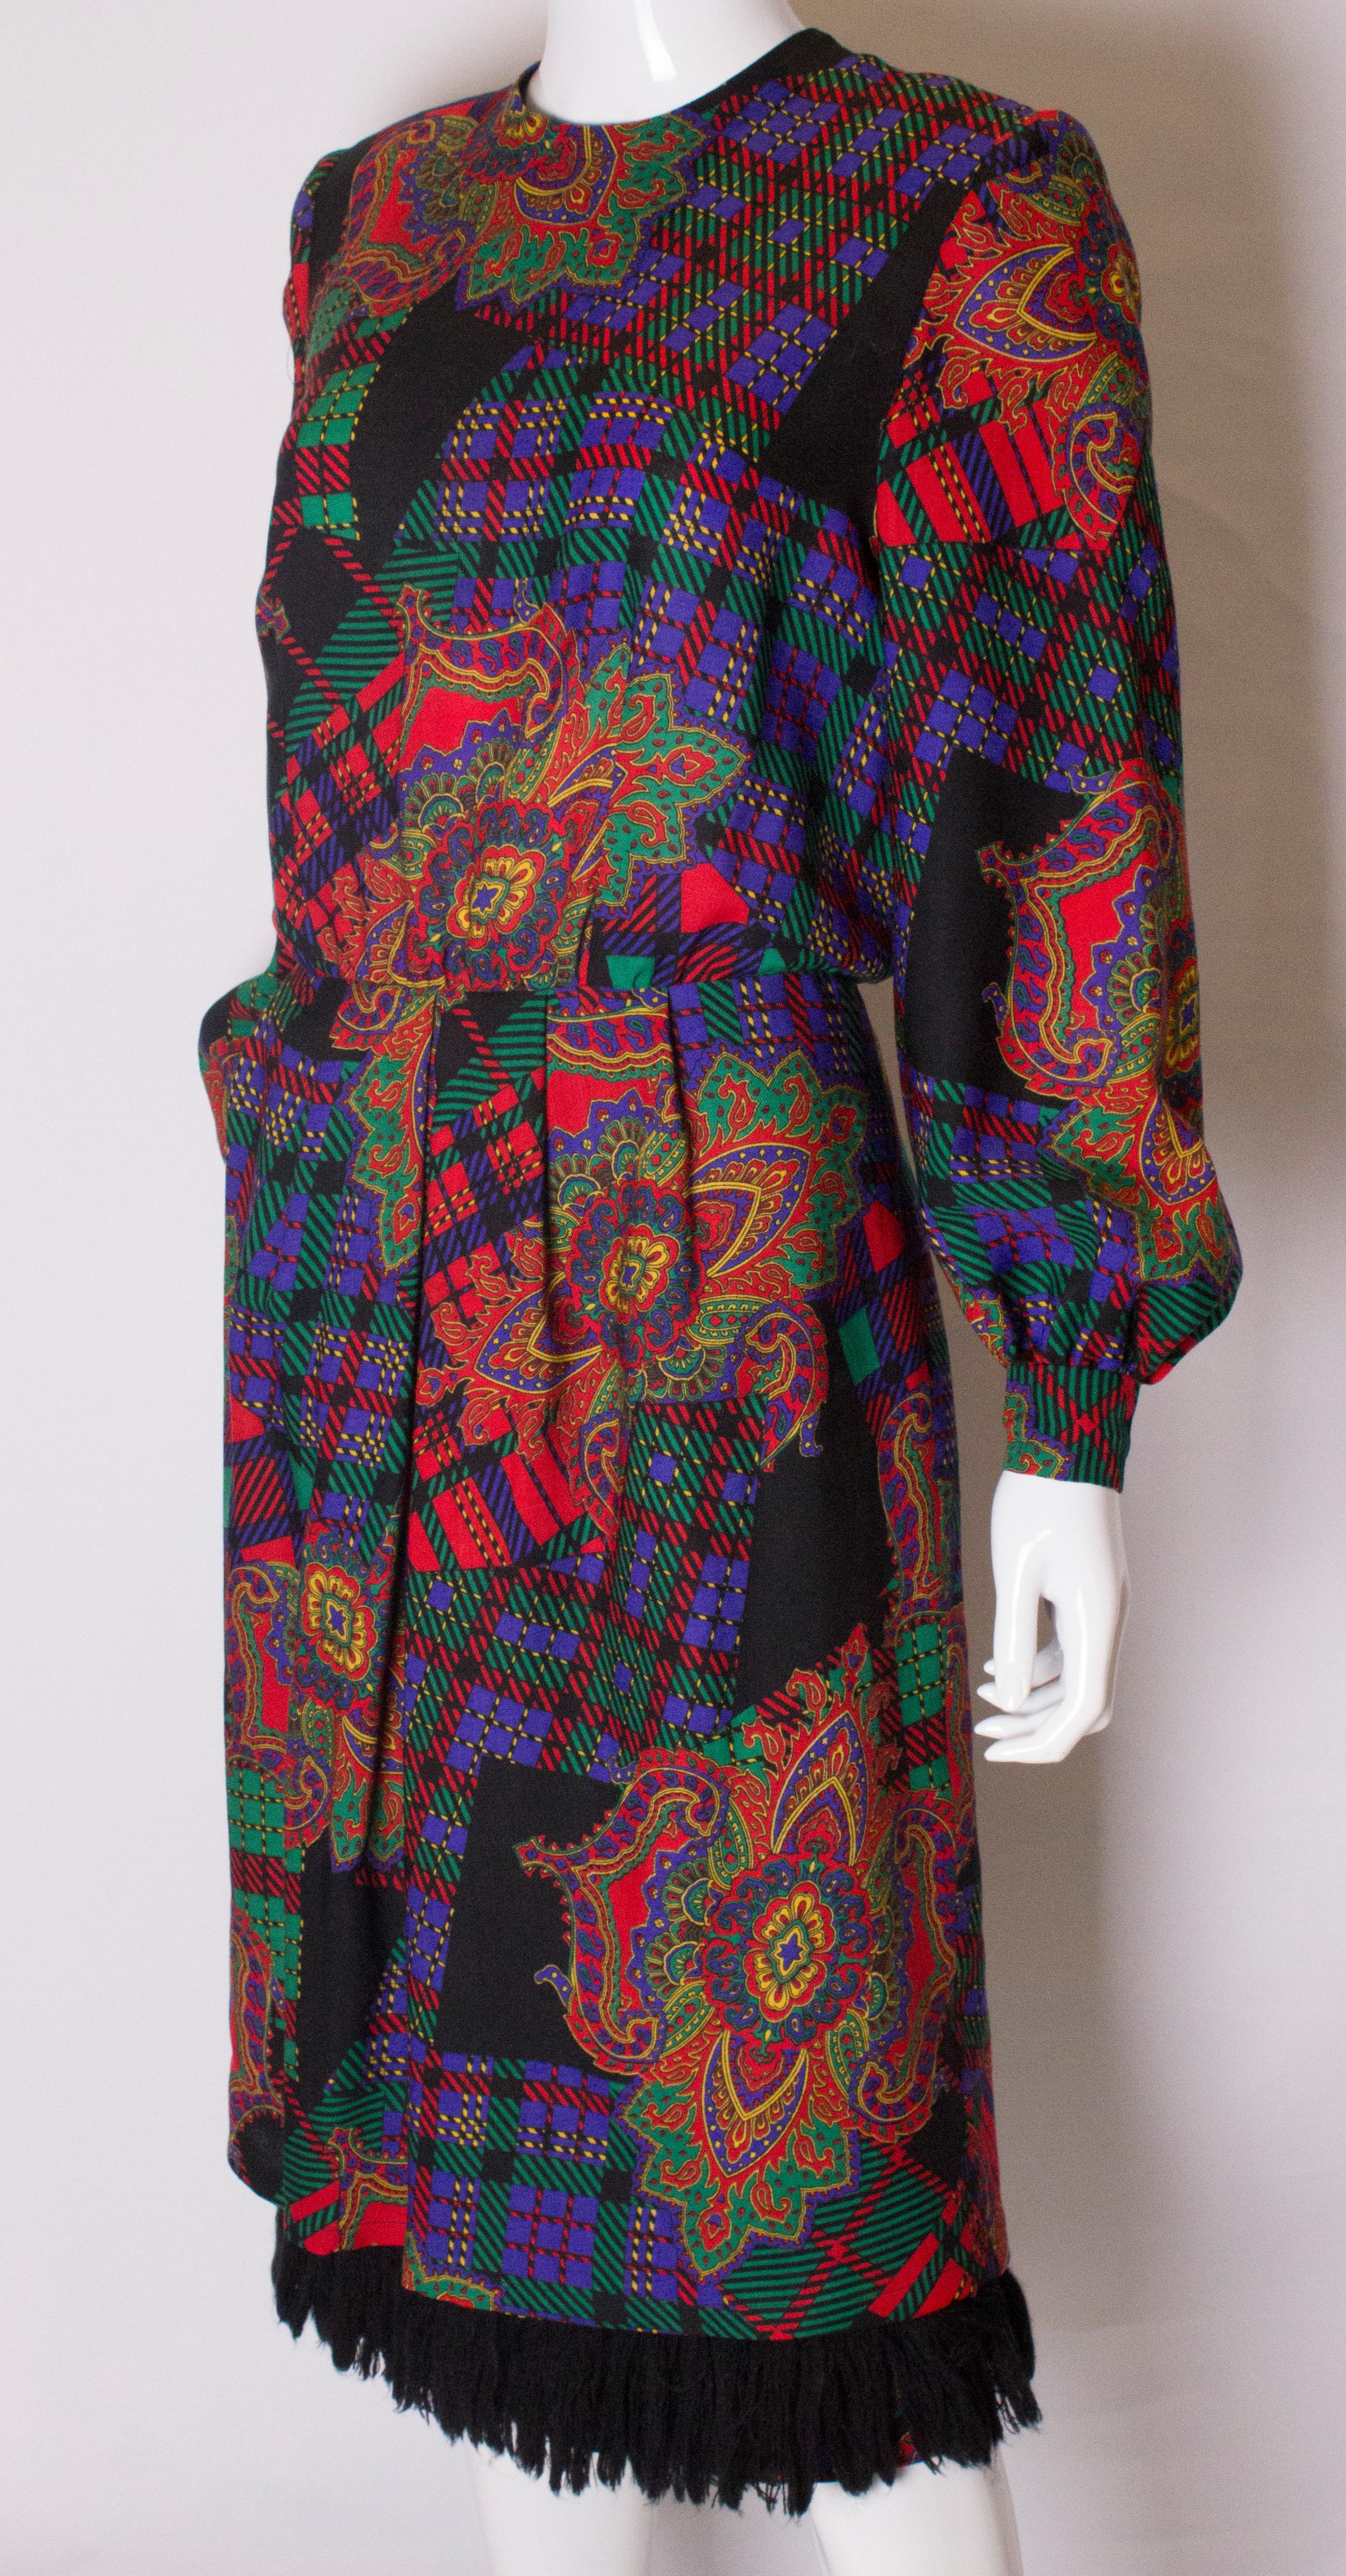 Vintage Donald Campbell Dress with Fringing at Hem In Good Condition For Sale In London, GB